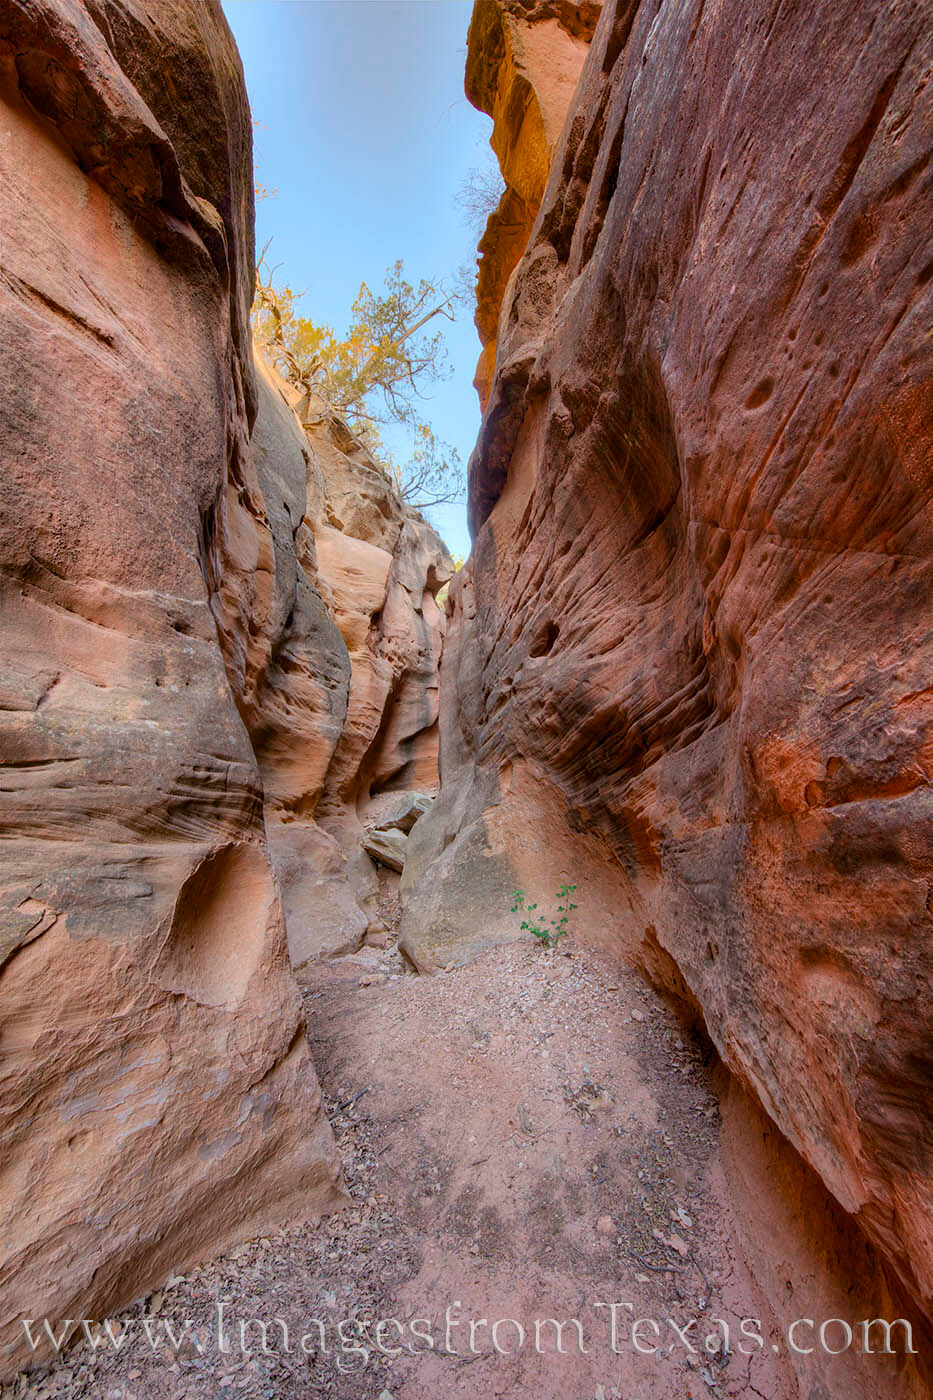 Fern Cave Slot Canyon is a hidden gem of Caprock Canyons S.P.